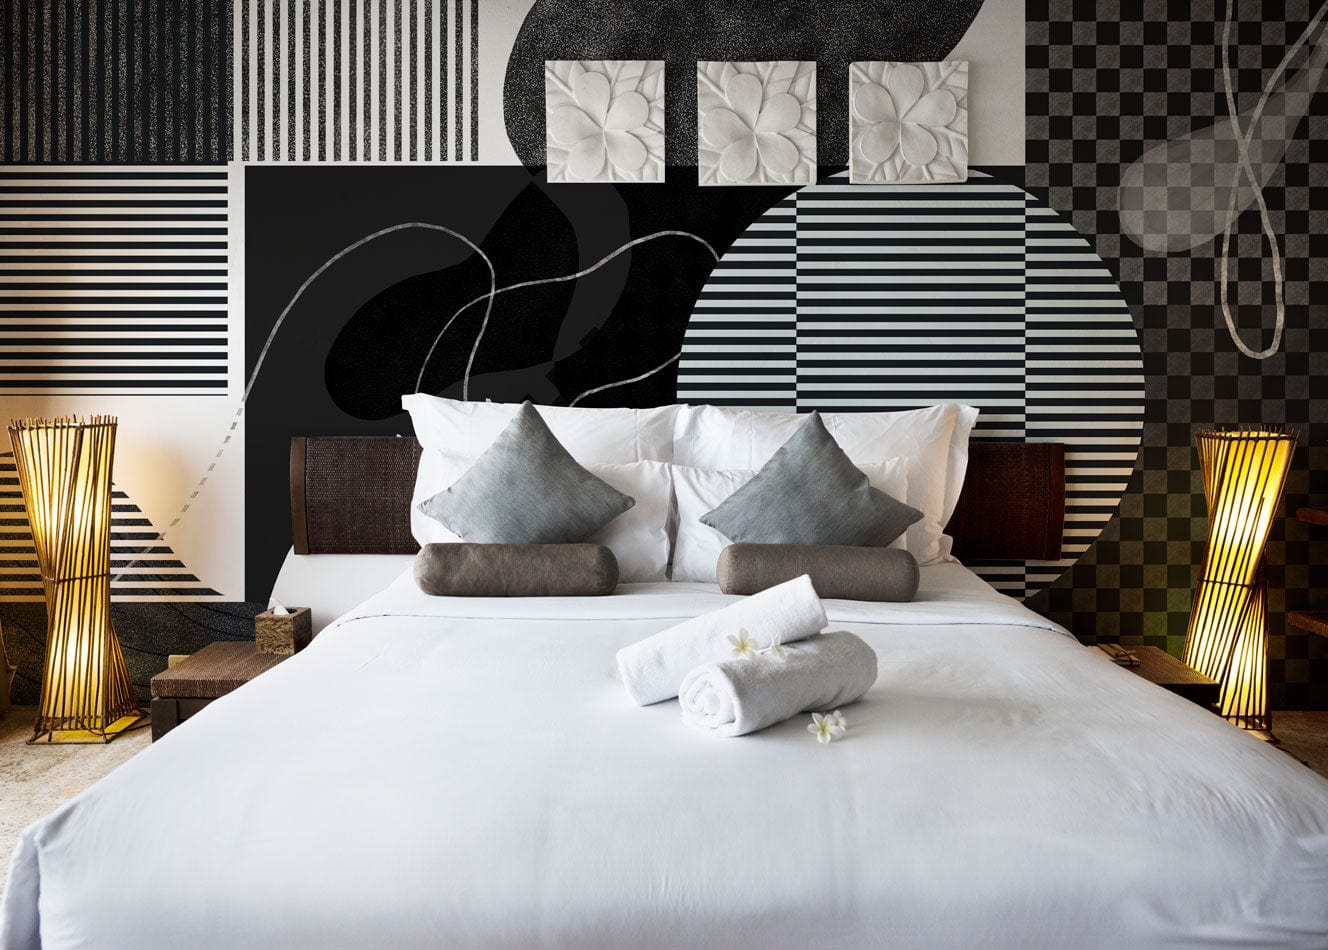 Mural Wallpaper in Abstract Black and White Shapes for the Decoration of Bedrooms